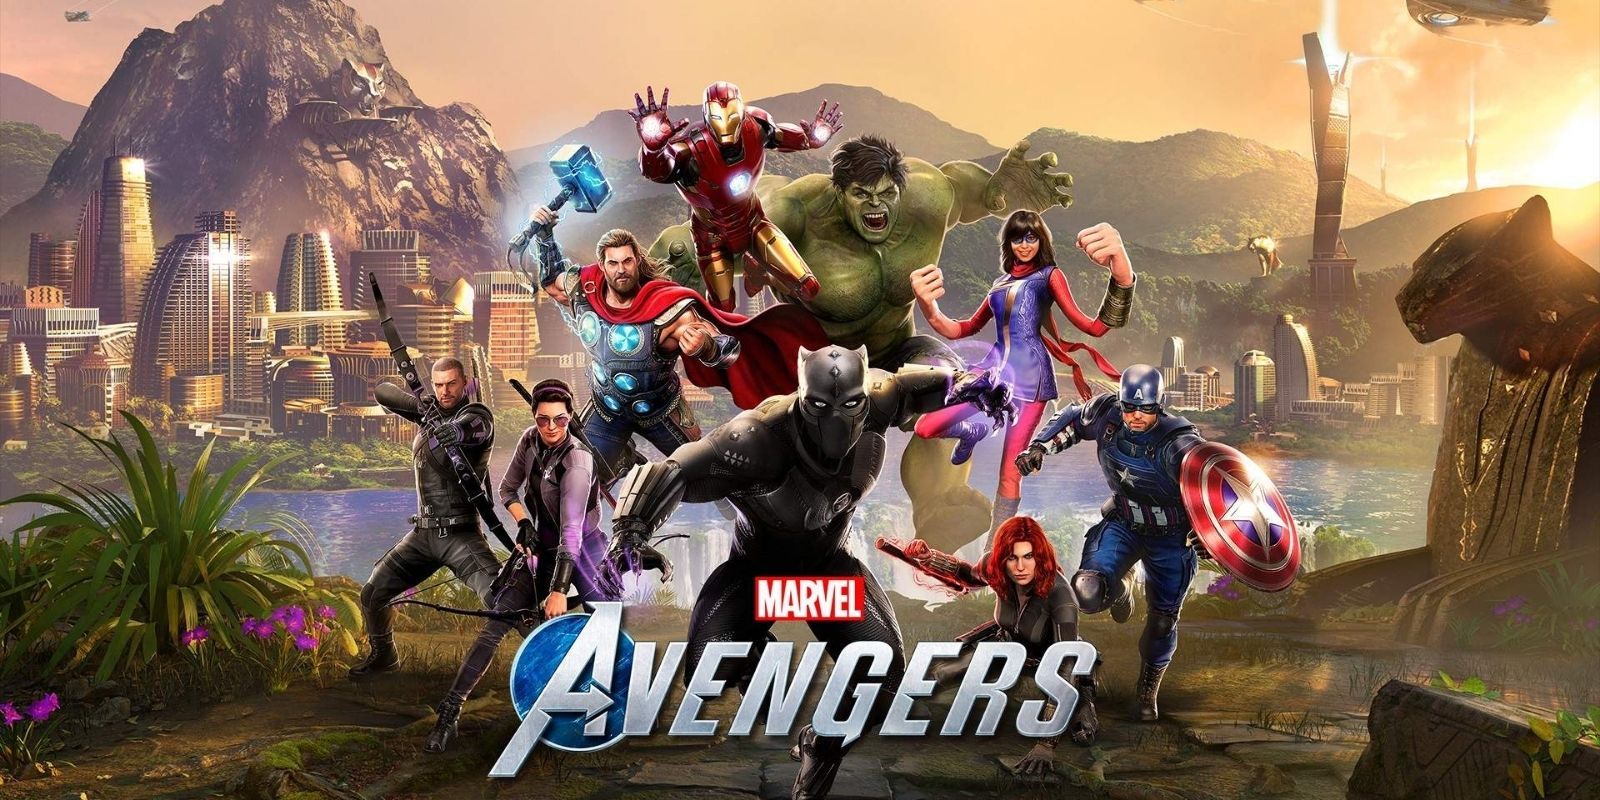 The roster of heroes as seen in Marvel's Avengers